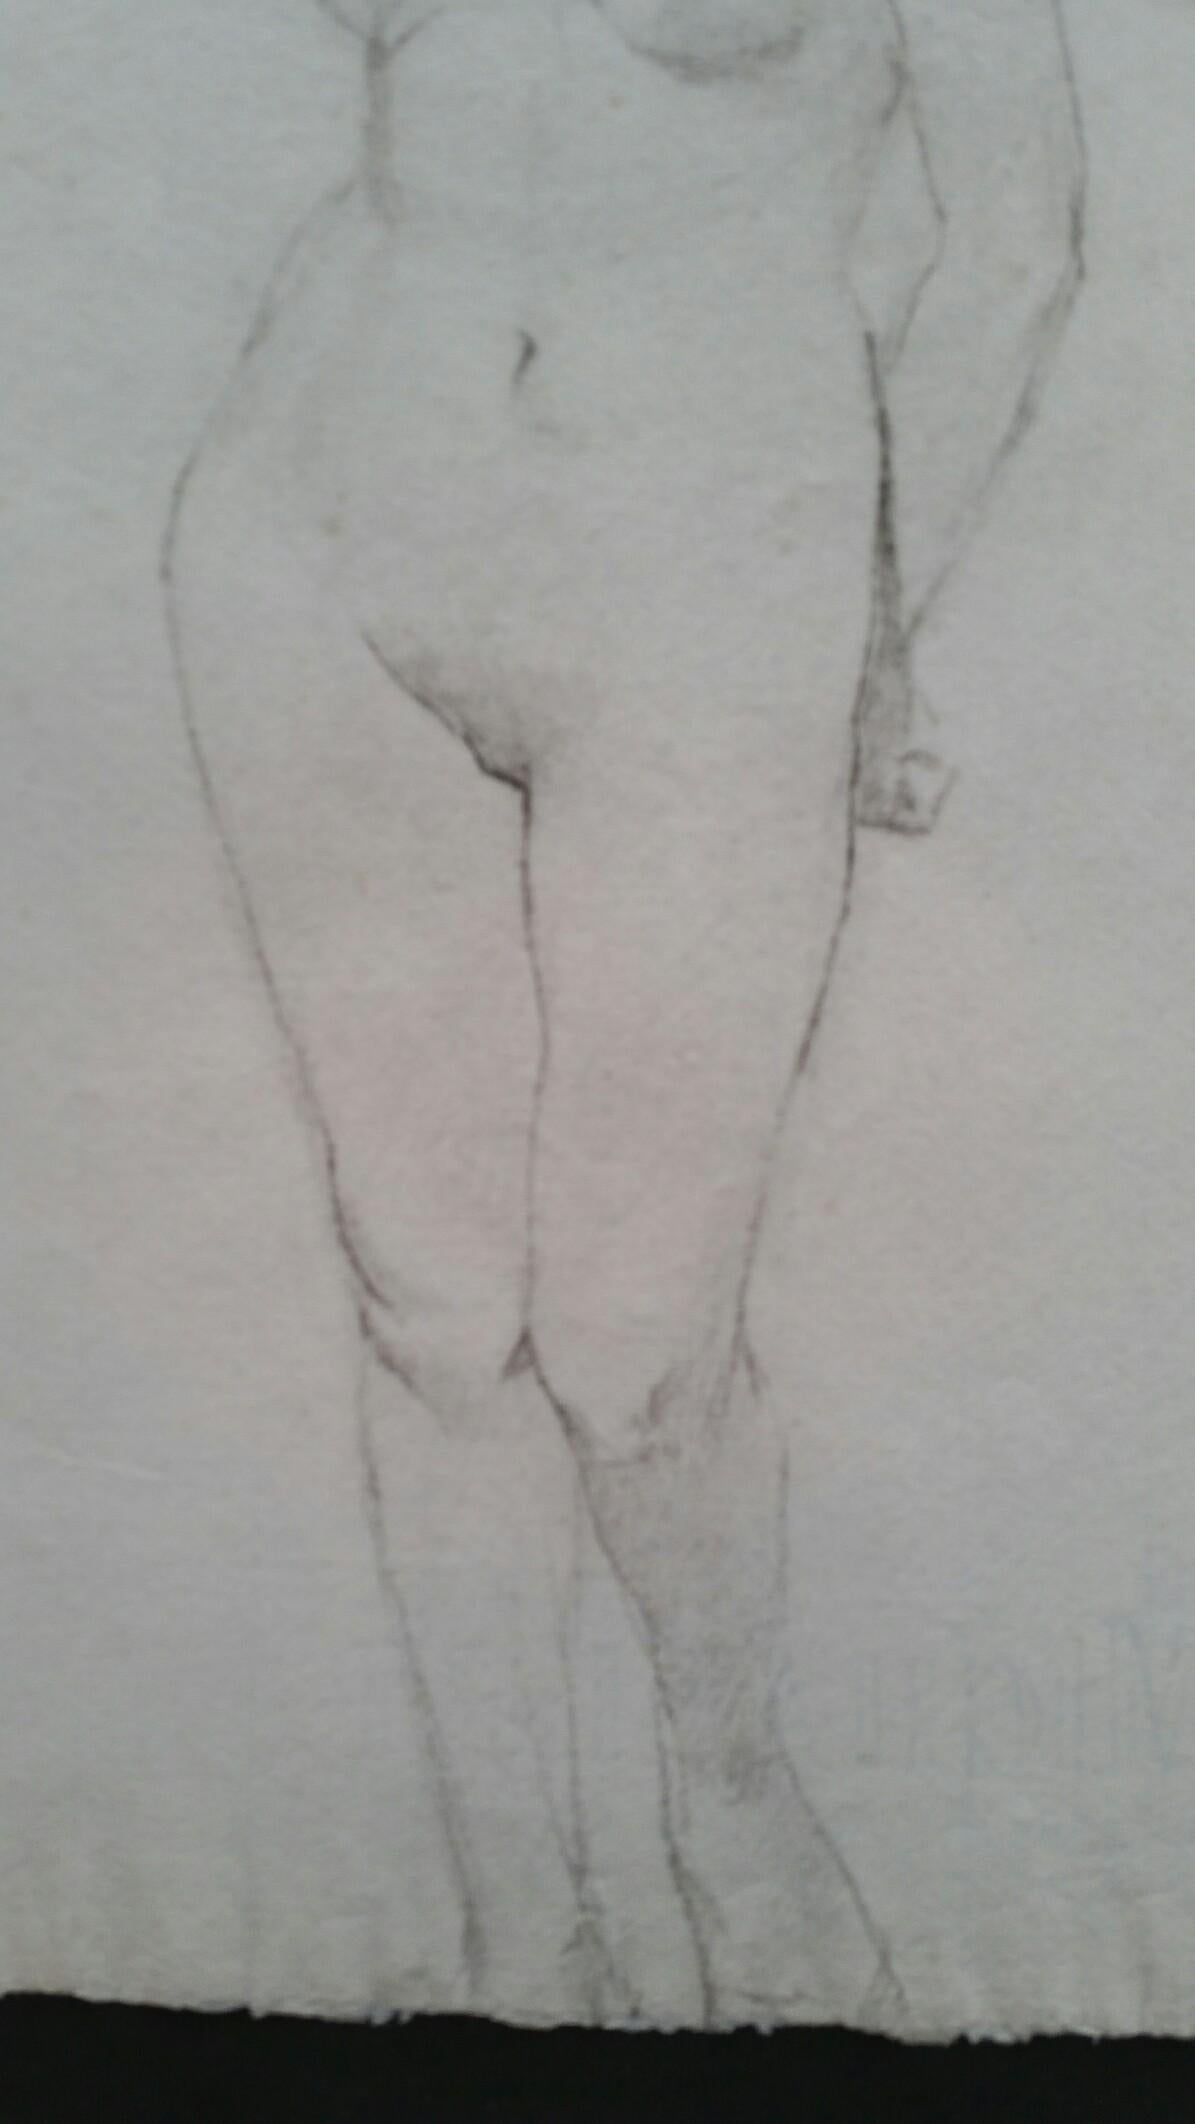 English Graphite Portrait Sketch of Female Nude, Standing Facing For Sale 2